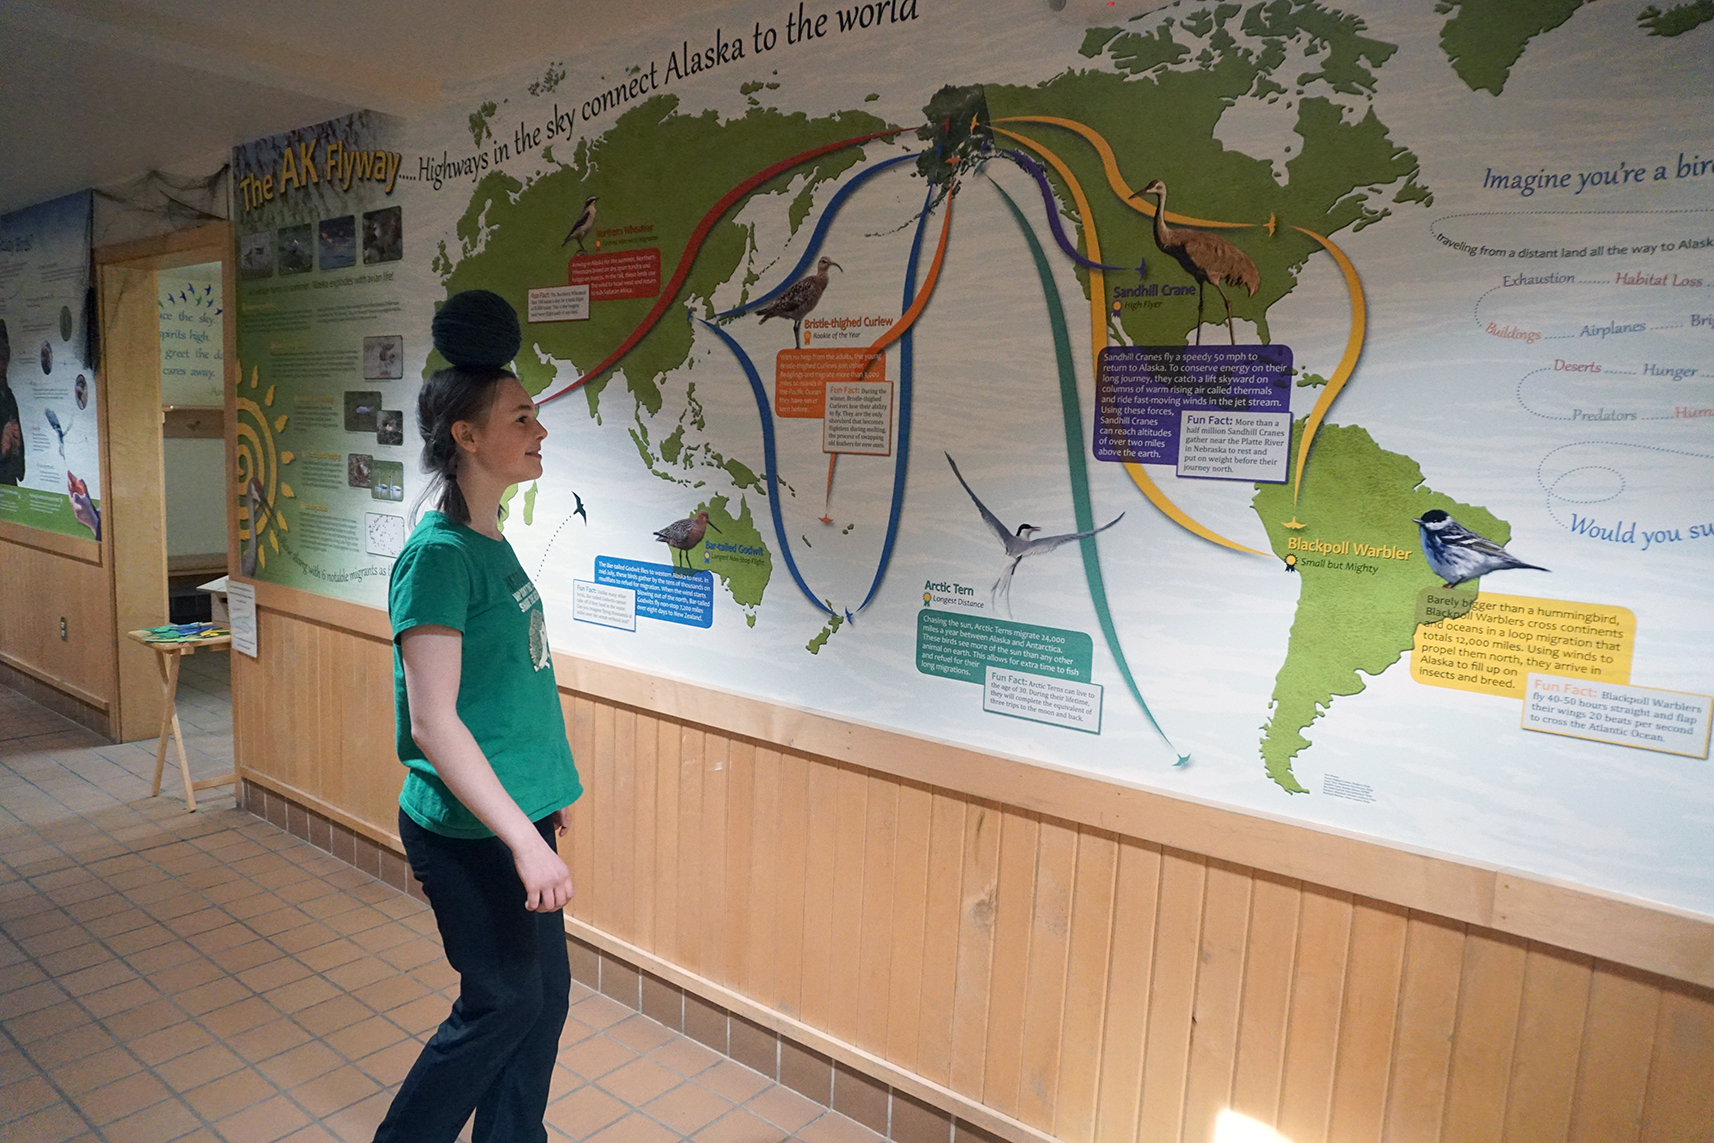 Girl in front of AK Flyway map wall